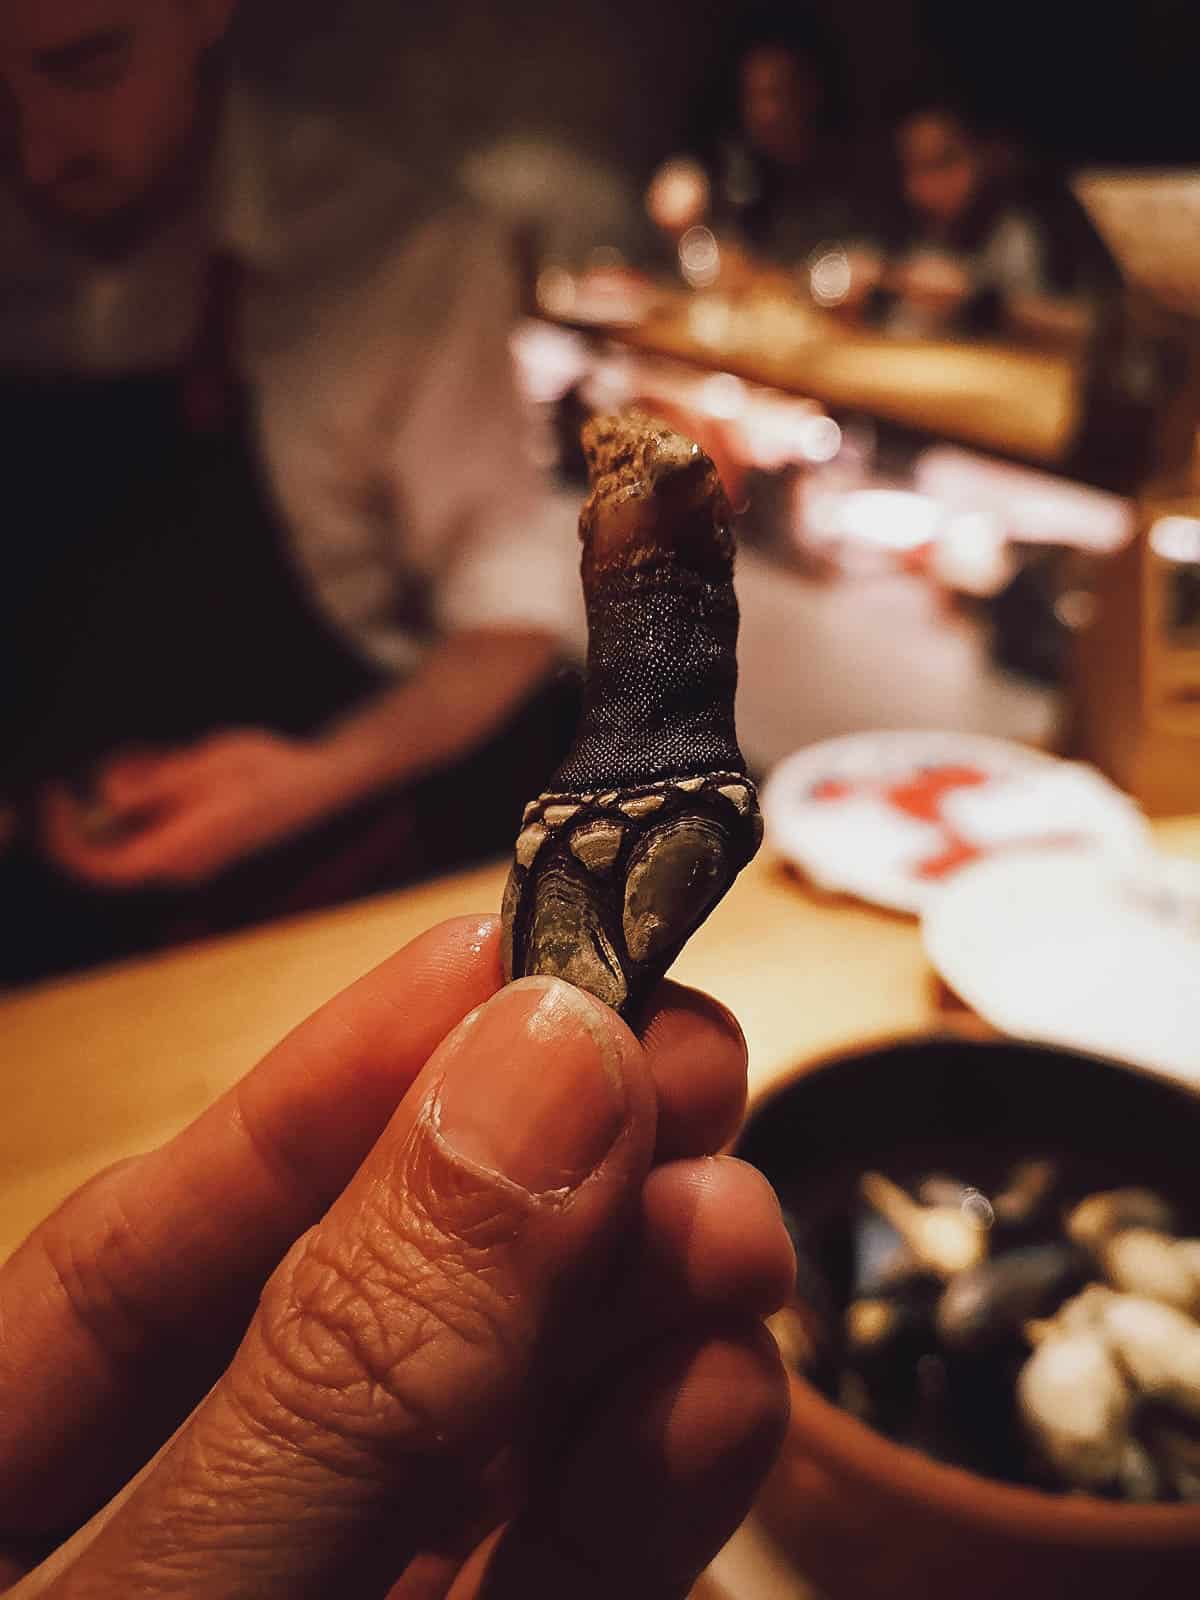 Percebes at a restaurant in Barcelona